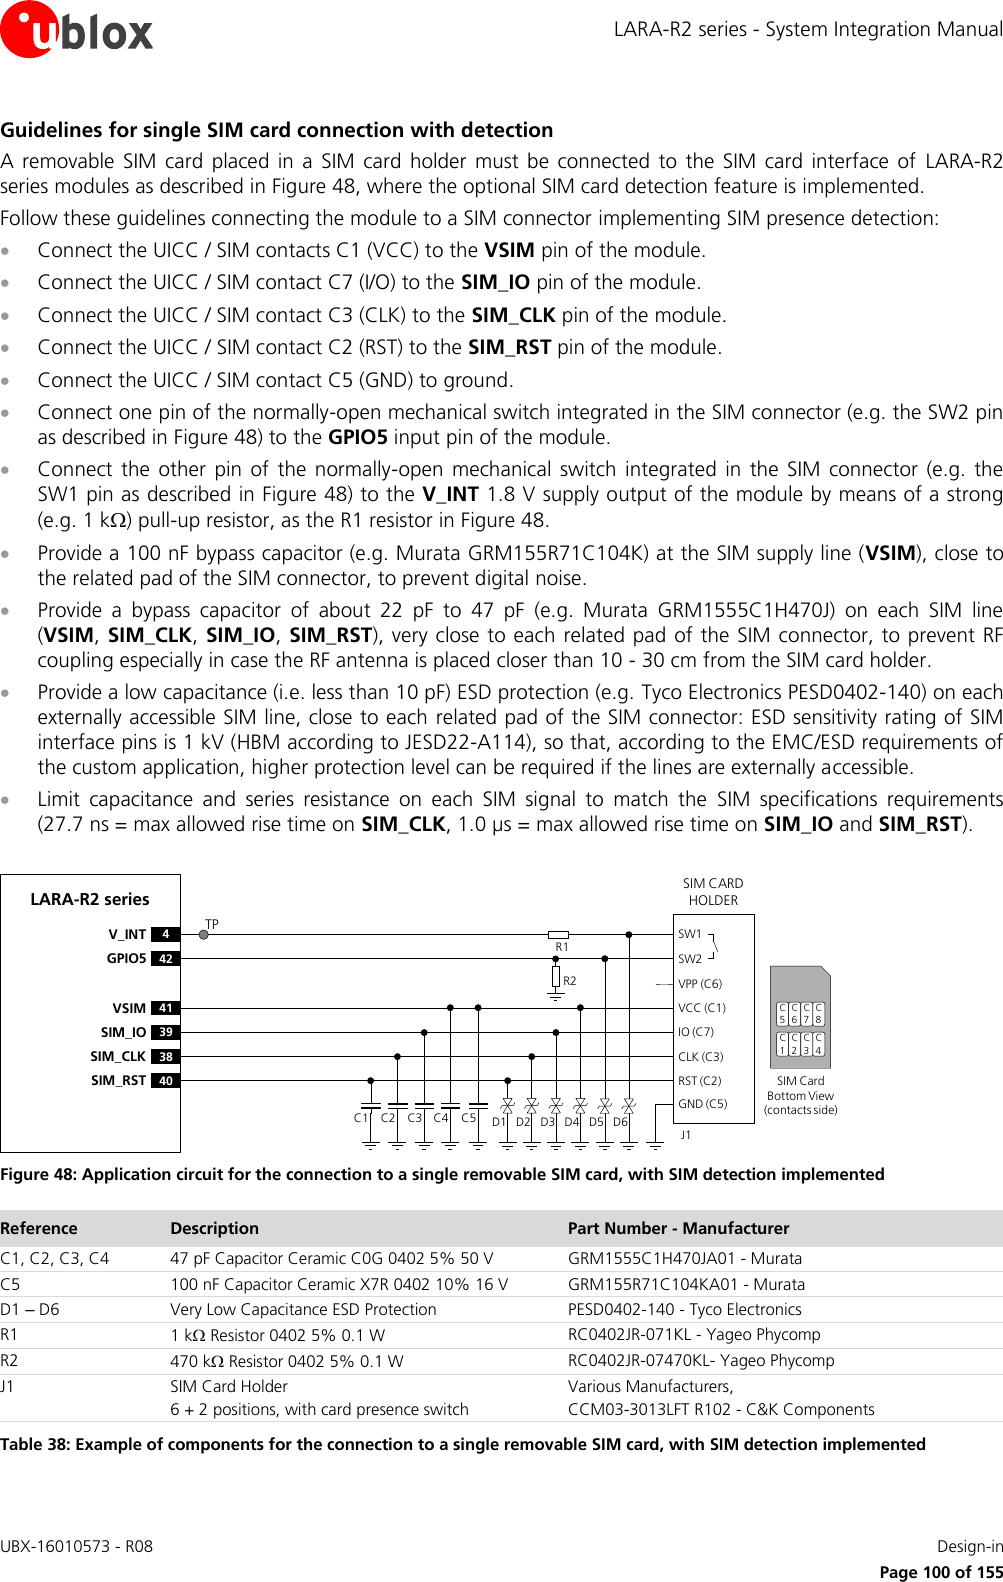 LARA-R2 series - System Integration Manual UBX-16010573 - R08    Design-in     Page 100 of 155 Guidelines for single SIM card connection with detection A  removable  SIM  card  placed  in  a  SIM  card  holder  must  be  connected  to  the  SIM  card  interface  of  LARA-R2 series modules as described in Figure 48, where the optional SIM card detection feature is implemented. Follow these guidelines connecting the module to a SIM connector implementing SIM presence detection:  Connect the UICC / SIM contacts C1 (VCC) to the VSIM pin of the module.  Connect the UICC / SIM contact C7 (I/O) to the SIM_IO pin of the module.  Connect the UICC / SIM contact C3 (CLK) to the SIM_CLK pin of the module.  Connect the UICC / SIM contact C2 (RST) to the SIM_RST pin of the module.  Connect the UICC / SIM contact C5 (GND) to ground.  Connect one pin of the normally-open mechanical switch integrated in the SIM connector (e.g. the SW2 pin as described in Figure 48) to the GPIO5 input pin of the module.  Connect  the  other  pin  of  the  normally-open  mechanical  switch  integrated  in  the  SIM  connector  (e.g.  the SW1 pin as described in Figure 48) to the V_INT 1.8 V supply output of the module by means of a strong (e.g. 1 k) pull-up resistor, as the R1 resistor in Figure 48.  Provide a 100 nF bypass capacitor (e.g. Murata GRM155R71C104K) at the SIM supply line (VSIM), close to the related pad of the SIM connector, to prevent digital noise.   Provide  a  bypass  capacitor  of  about  22  pF  to  47  pF  (e.g.  Murata  GRM1555C1H470J)  on  each  SIM  line (VSIM, SIM_CLK, SIM_IO,  SIM_RST), very close to each related pad of the SIM connector, to prevent RF coupling especially in case the RF antenna is placed closer than 10 - 30 cm from the SIM card holder.  Provide a low capacitance (i.e. less than 10 pF) ESD protection (e.g. Tyco Electronics PESD0402-140) on each externally accessible SIM line, close to each related pad of the SIM connector: ESD sensitivity rating of SIM interface pins is 1 kV (HBM according to JESD22-A114), so that, according to the EMC/ESD requirements of the custom application, higher protection level can be required if the lines are externally accessible.   Limit  capacitance  and  series  resistance  on  each  SIM  signal  to  match  the  SIM  specifications  requirements (27.7 ns = max allowed rise time on SIM_CLK, 1.0 µs = max allowed rise time on SIM_IO and SIM_RST).  LARA-R2 series41VSIM39SIM_IO38SIM_CLK40SIM_RST4V_INT42GPIO5SIM CARD HOLDERC5C6C7C1C2C3SIM Card Bottom View (contacts side)C1VPP (C6)VCC (C1)IO (C7)CLK (C3)RST (C2)GND (C5)C2 C3 C5J1C4SW1SW2D1 D2 D3 D4 D5 D6R2R1C8C4TP Figure 48: Application circuit for the connection to a single removable SIM card, with SIM detection implemented Reference Description Part Number - Manufacturer C1, C2, C3, C4 47 pF Capacitor Ceramic C0G 0402 5% 50 V GRM1555C1H470JA01 - Murata C5 100 nF Capacitor Ceramic X7R 0402 10% 16 V GRM155R71C104KA01 - Murata D1 – D6 Very Low Capacitance ESD Protection PESD0402-140 - Tyco Electronics  R1 1 k Resistor 0402 5% 0.1 W RC0402JR-071KL - Yageo Phycomp R2 470 k Resistor 0402 5% 0.1 W RC0402JR-07470KL- Yageo Phycomp J1 SIM Card Holder 6 + 2 positions, with card presence switch Various Manufacturers, CCM03-3013LFT R102 - C&amp;K Components Table 38: Example of components for the connection to a single removable SIM card, with SIM detection implemented  